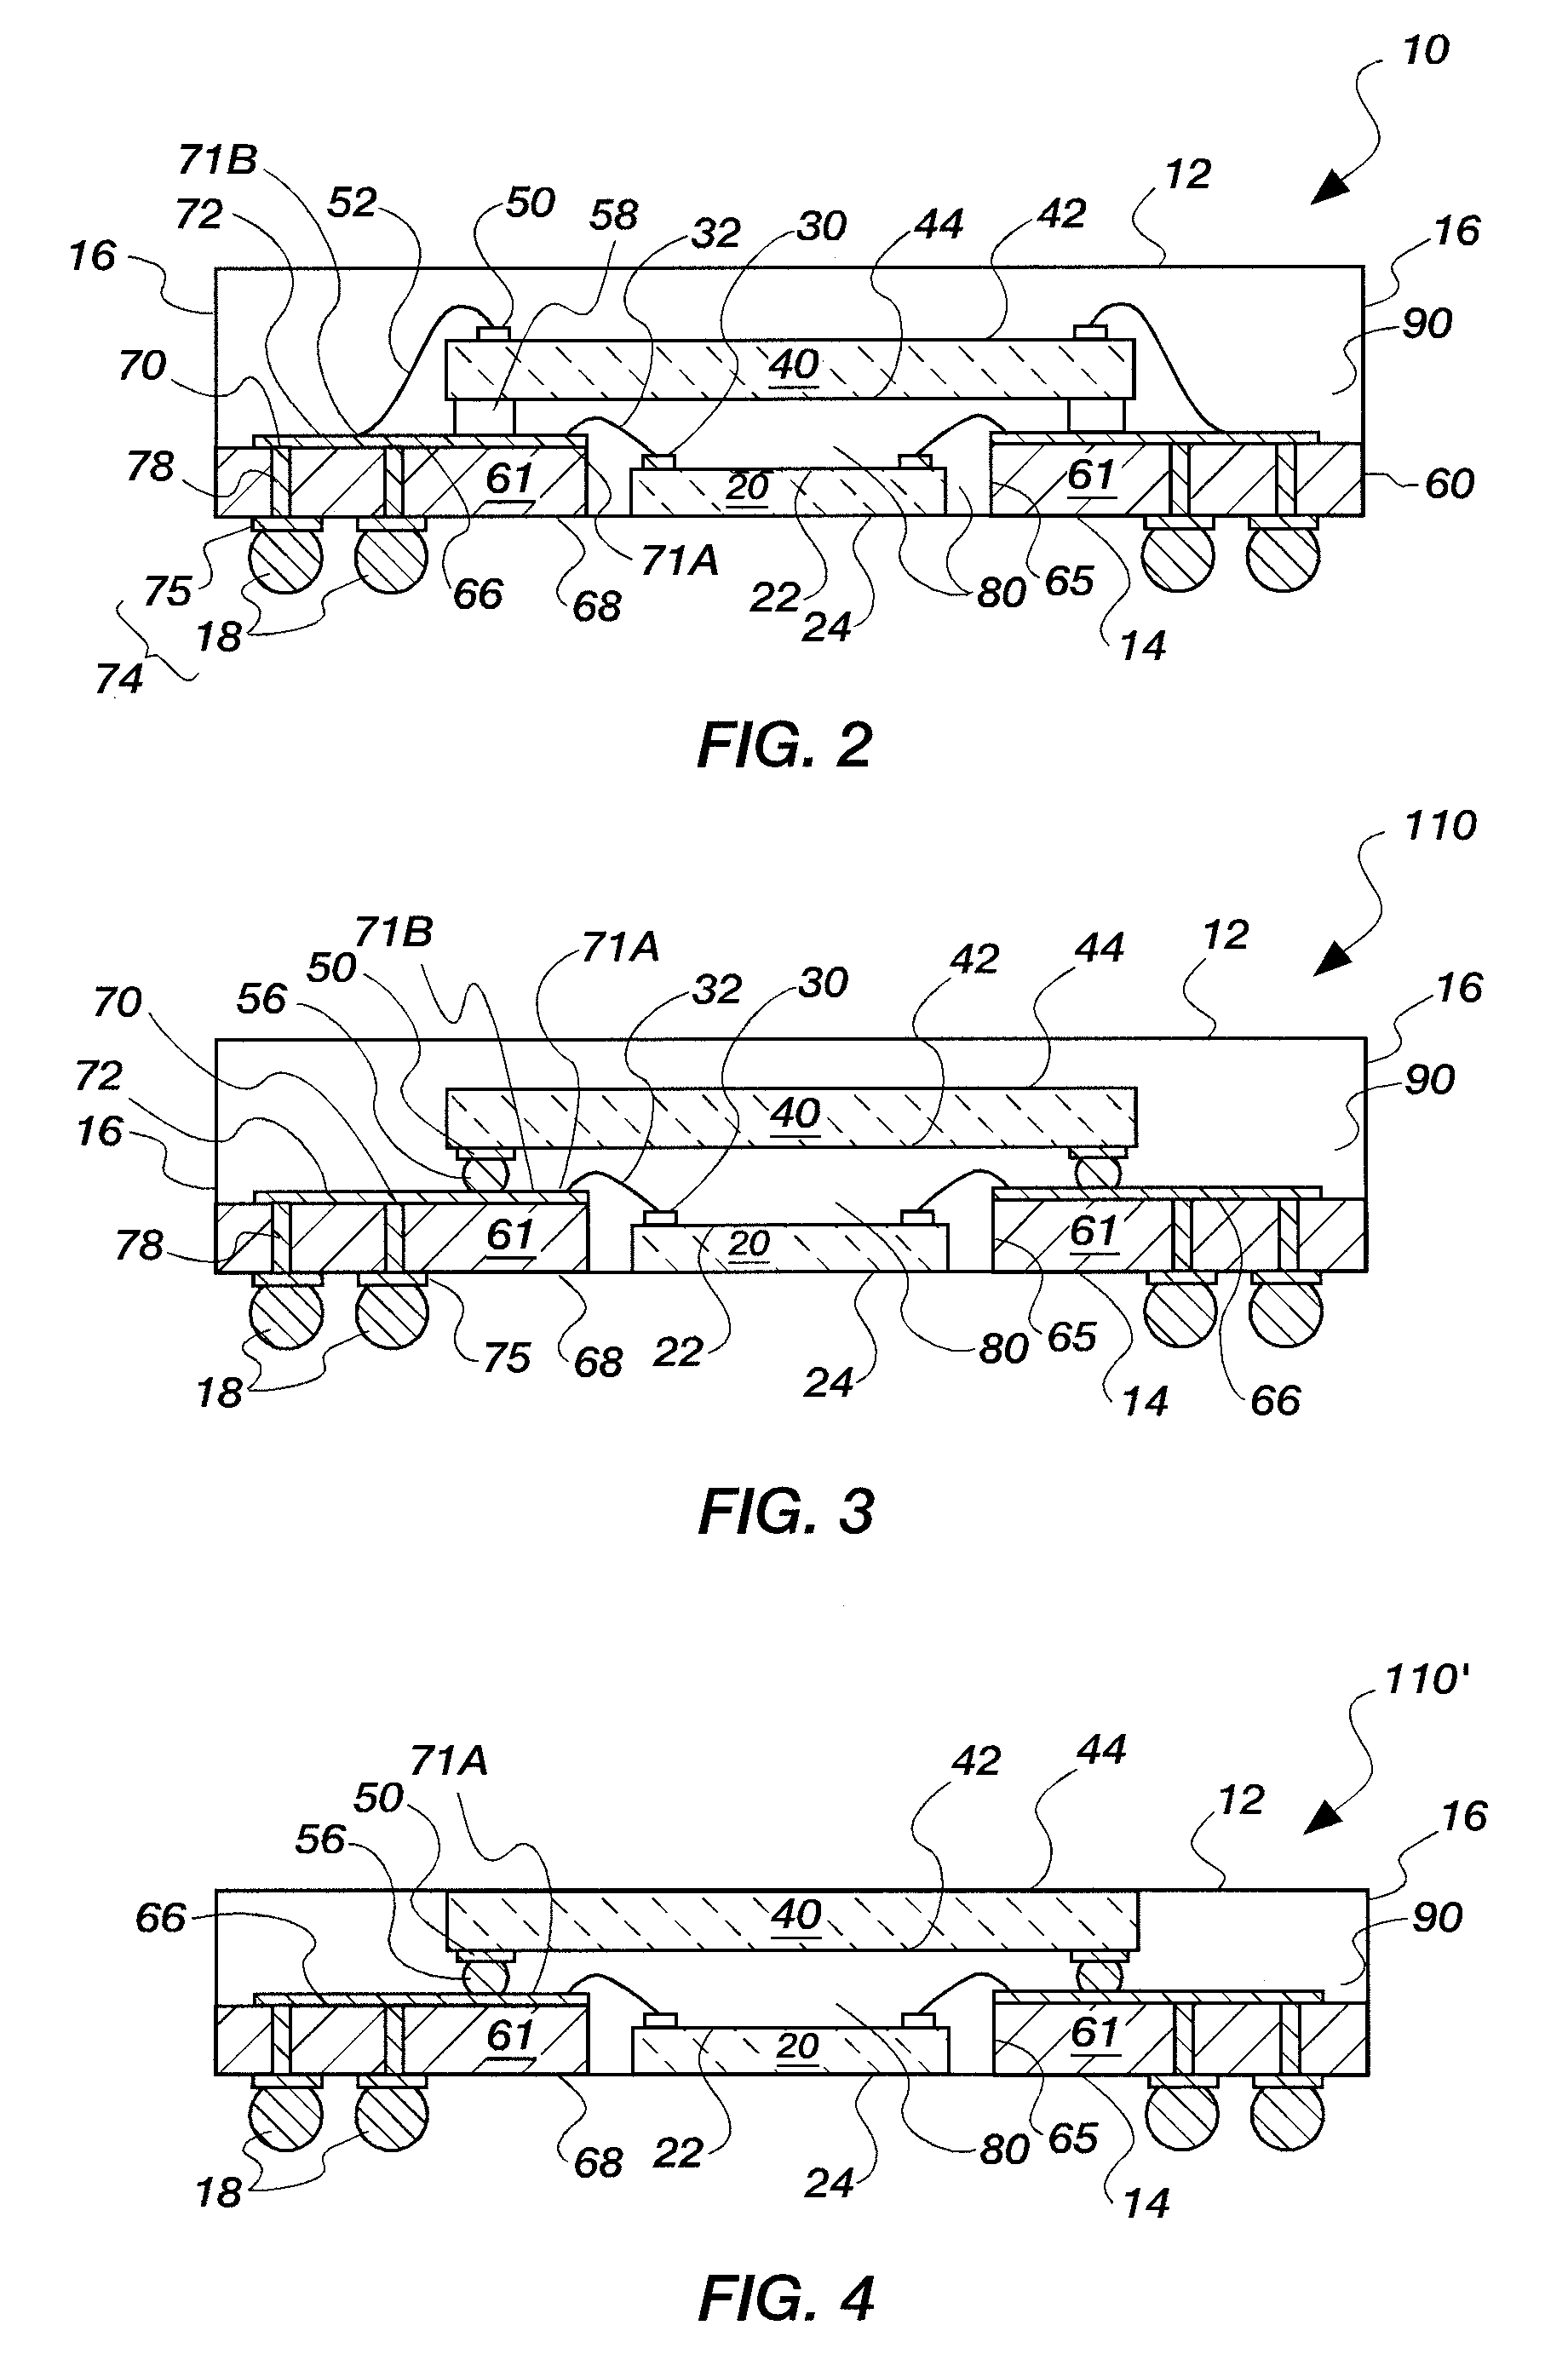 Semiconductor device assemblies and packages including multiple semiconductor device components